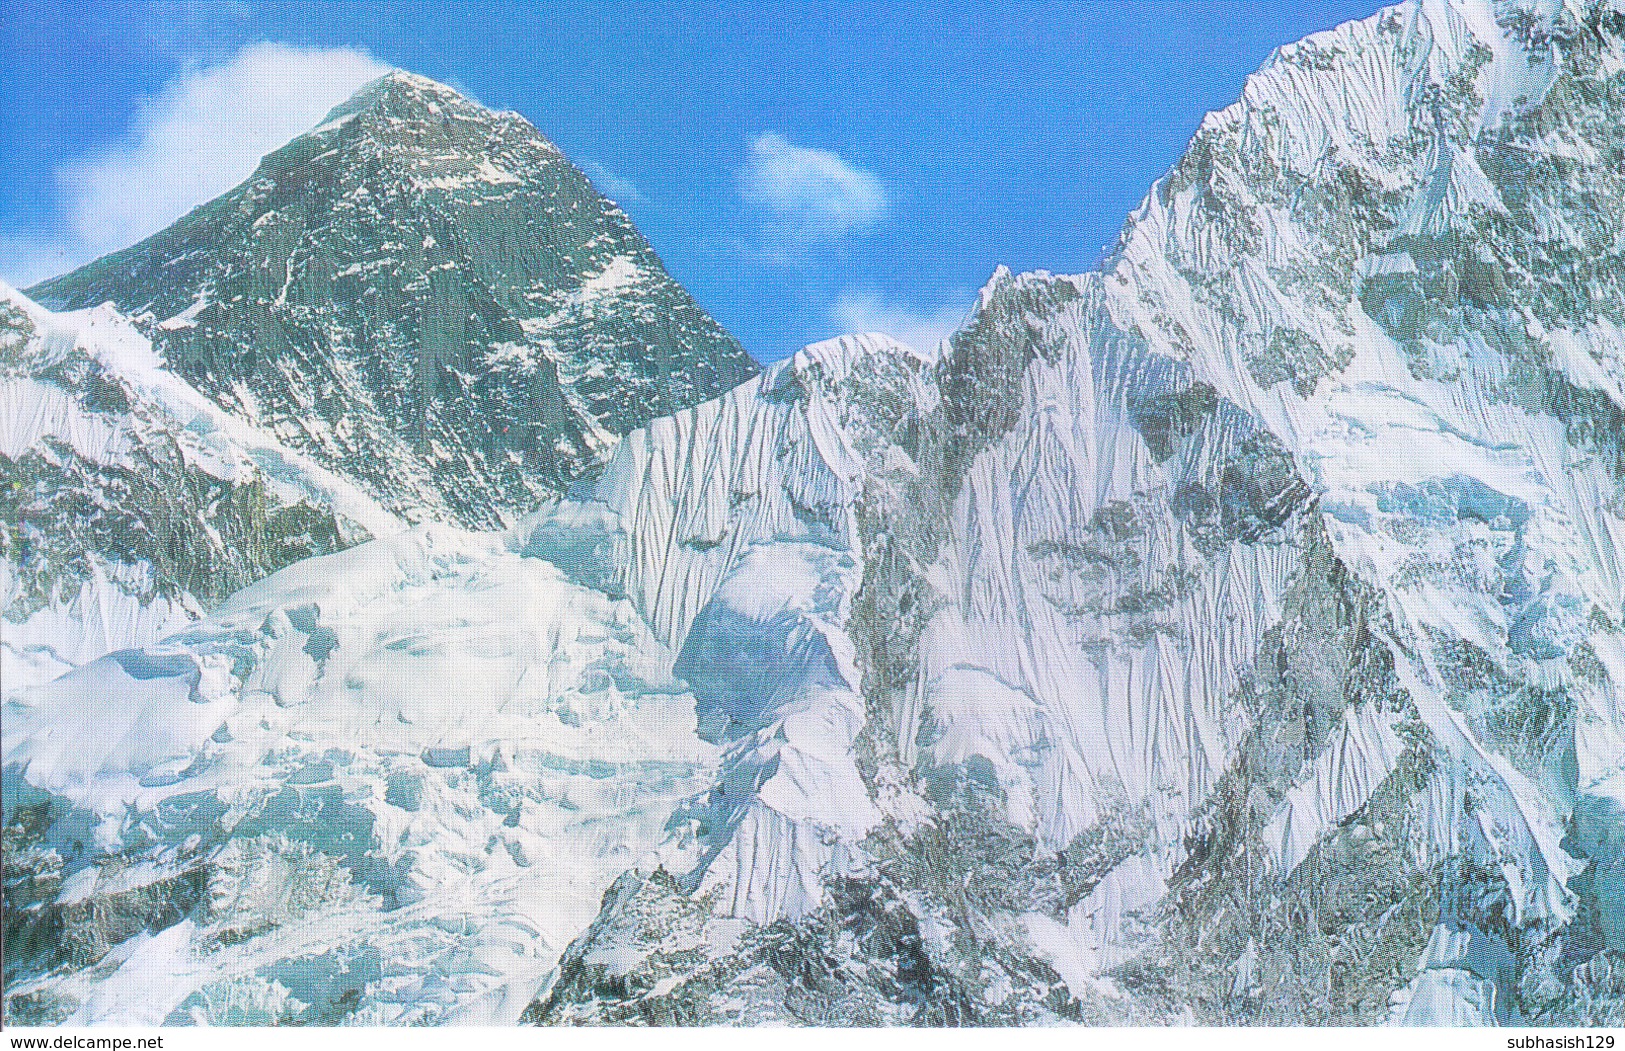 NEPAL - COLOUR PICTURE POST CARD - PEAKS OF HIMALAYA - MT. EVEREST - TRAVEL / TOURISM / MOUNTAINEERING - Nepal